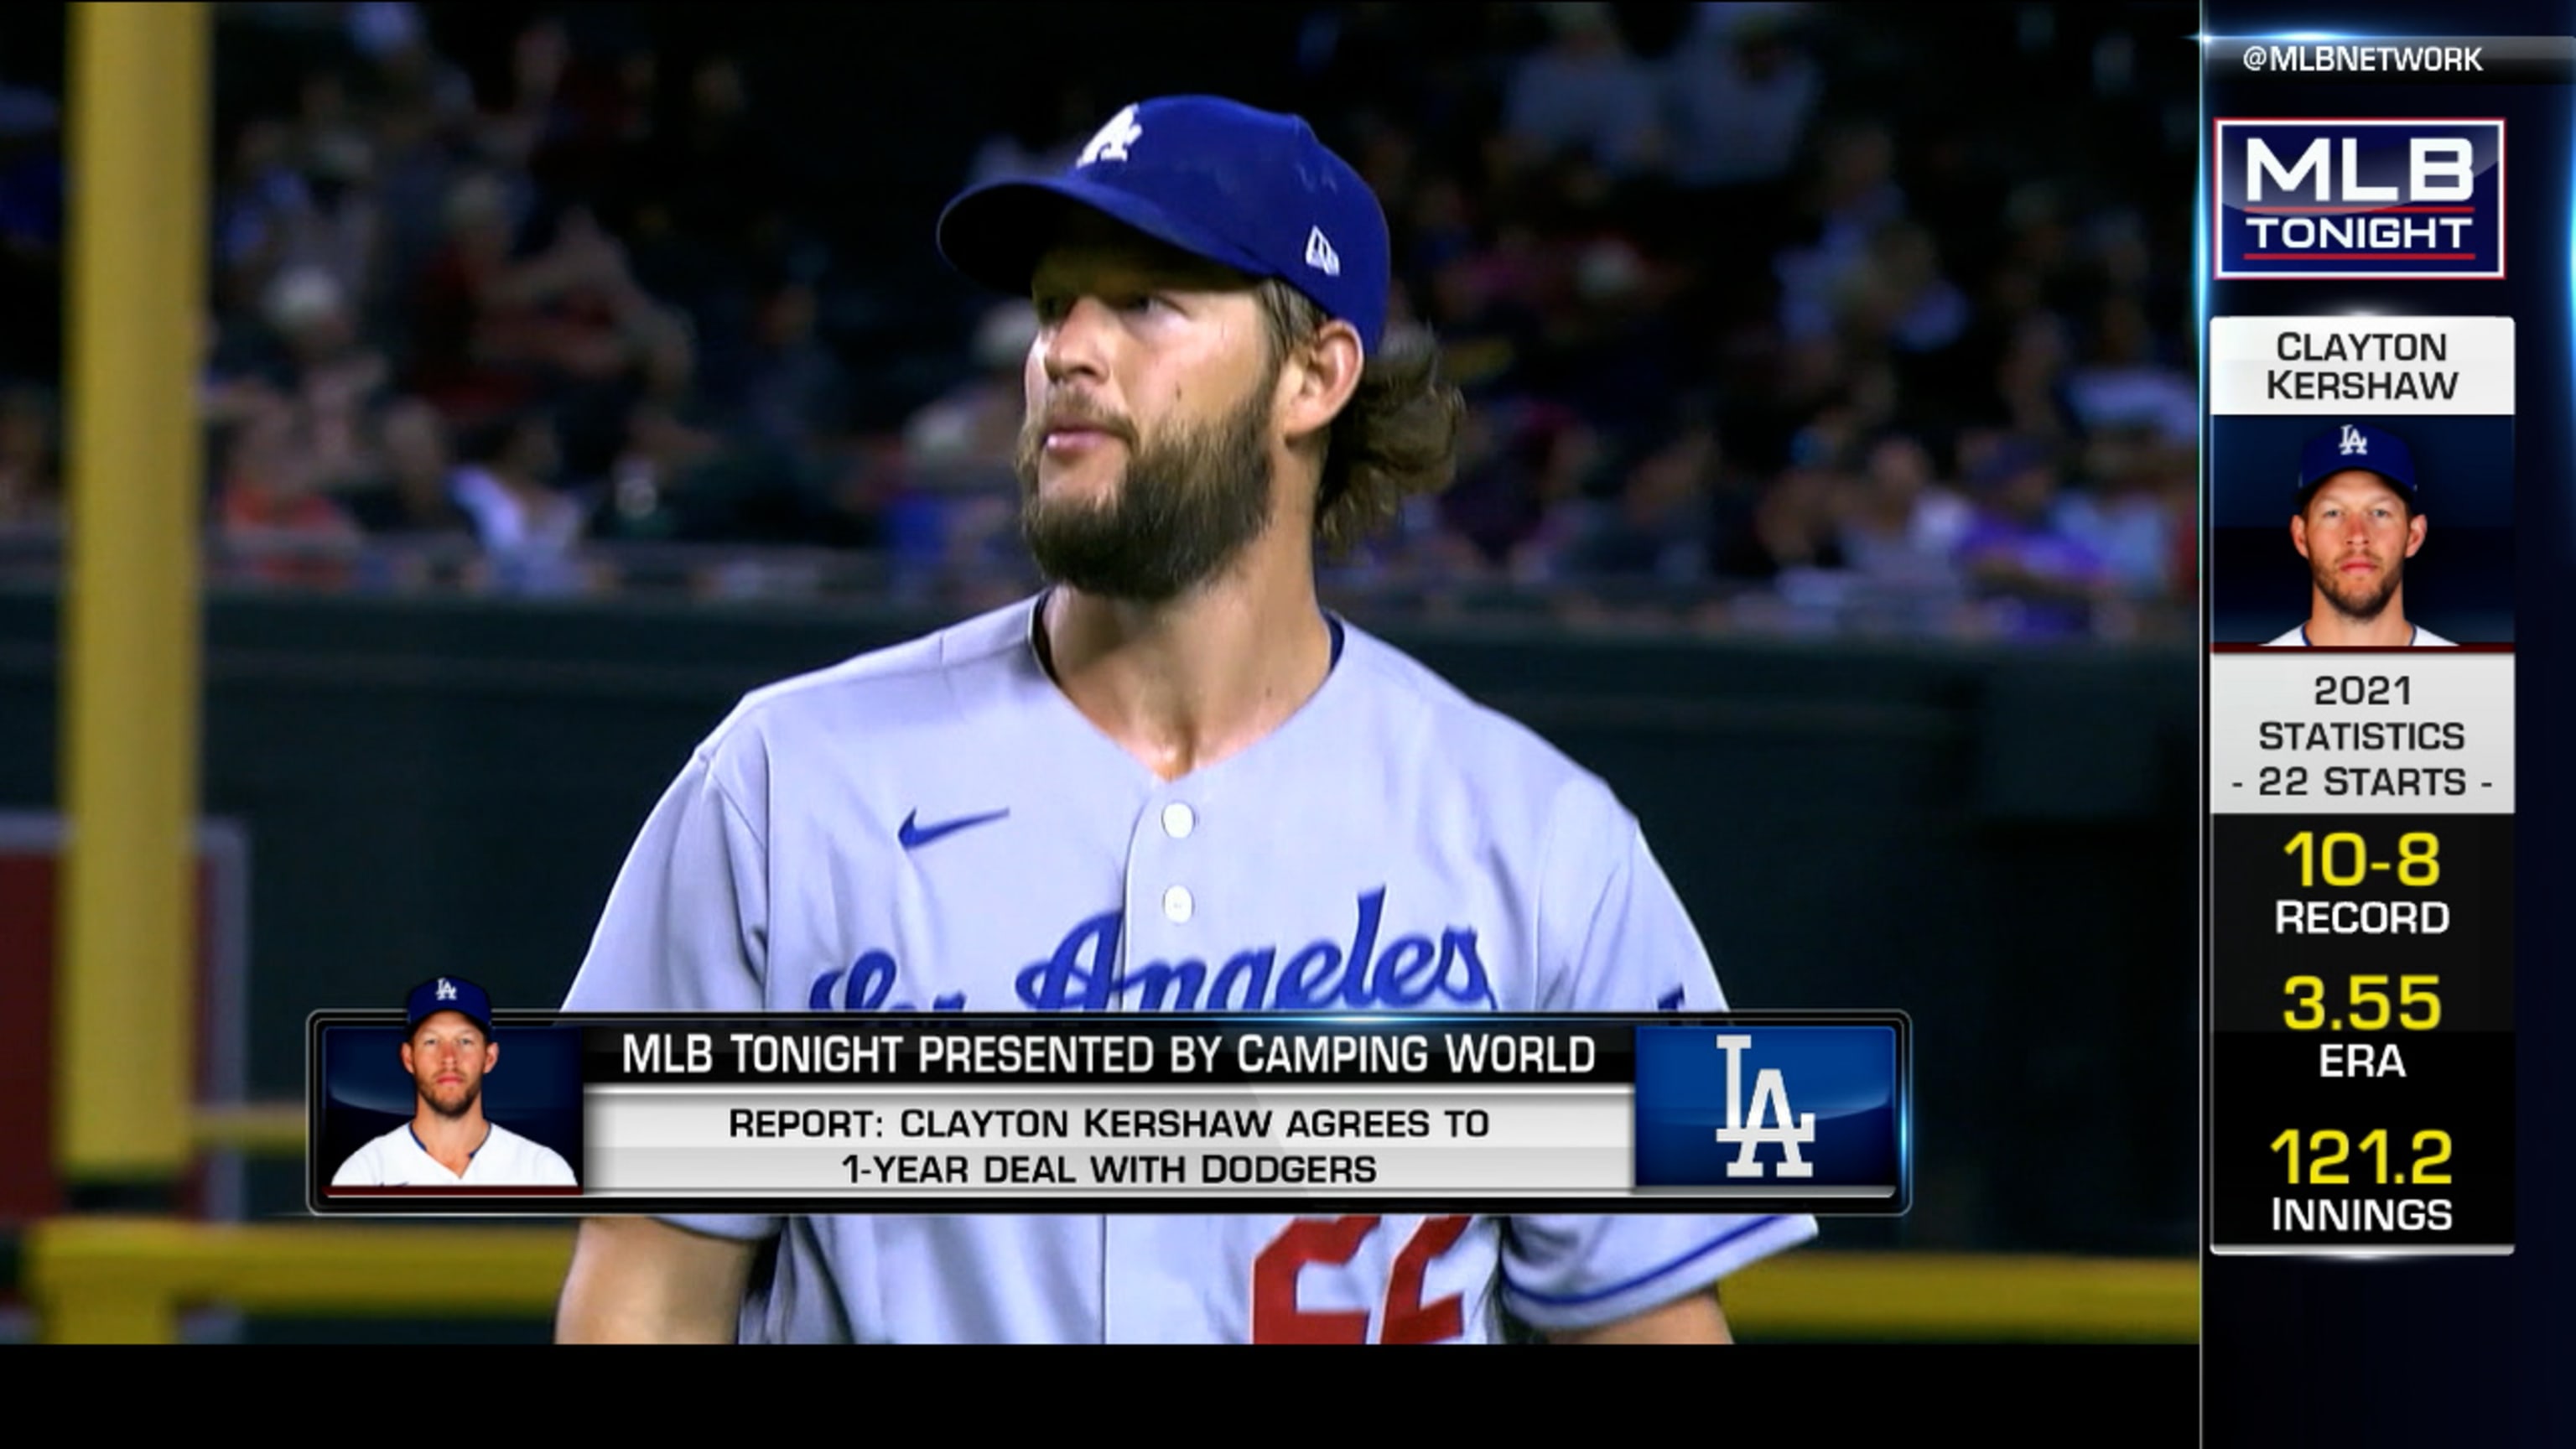 Clayton Kershaw re-signs with Dodgers on 1-year deal